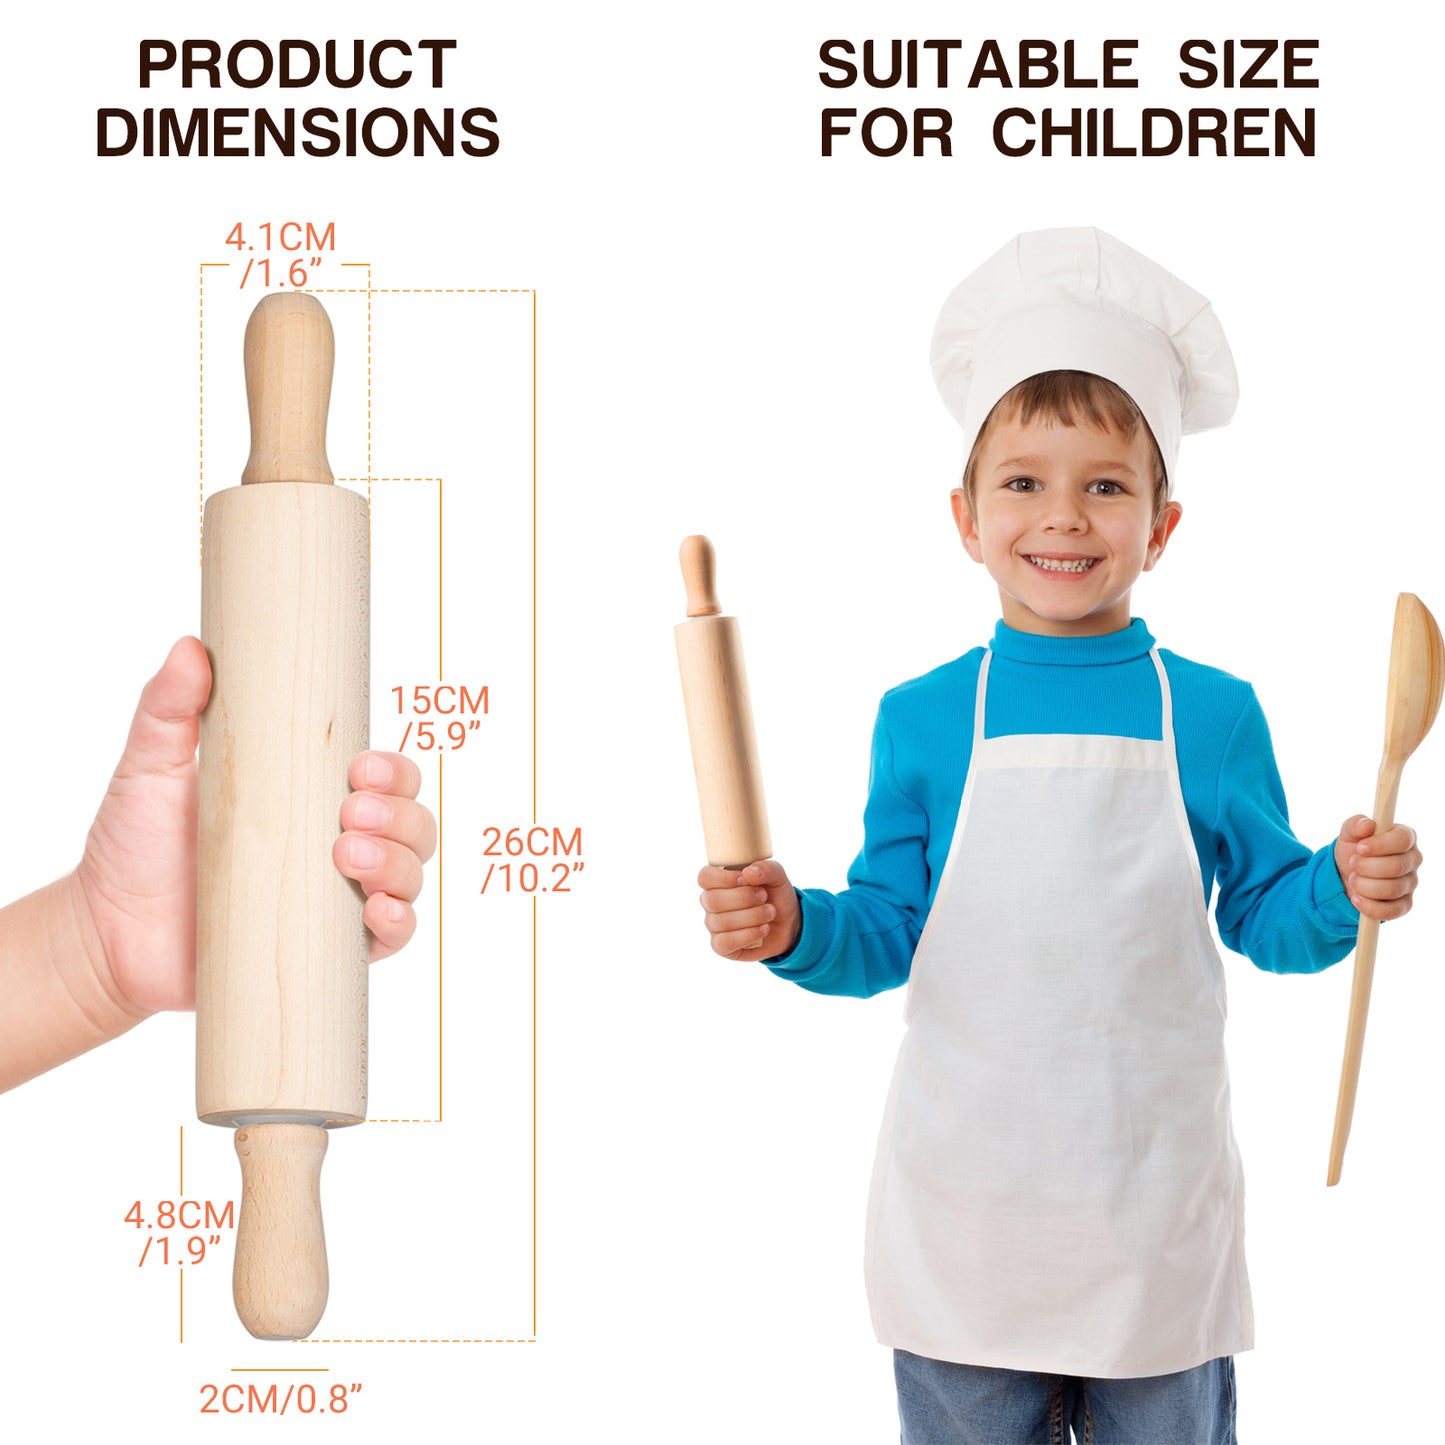 Classic Mini Wooden Rolling Pin 10.2 Inch for Kids